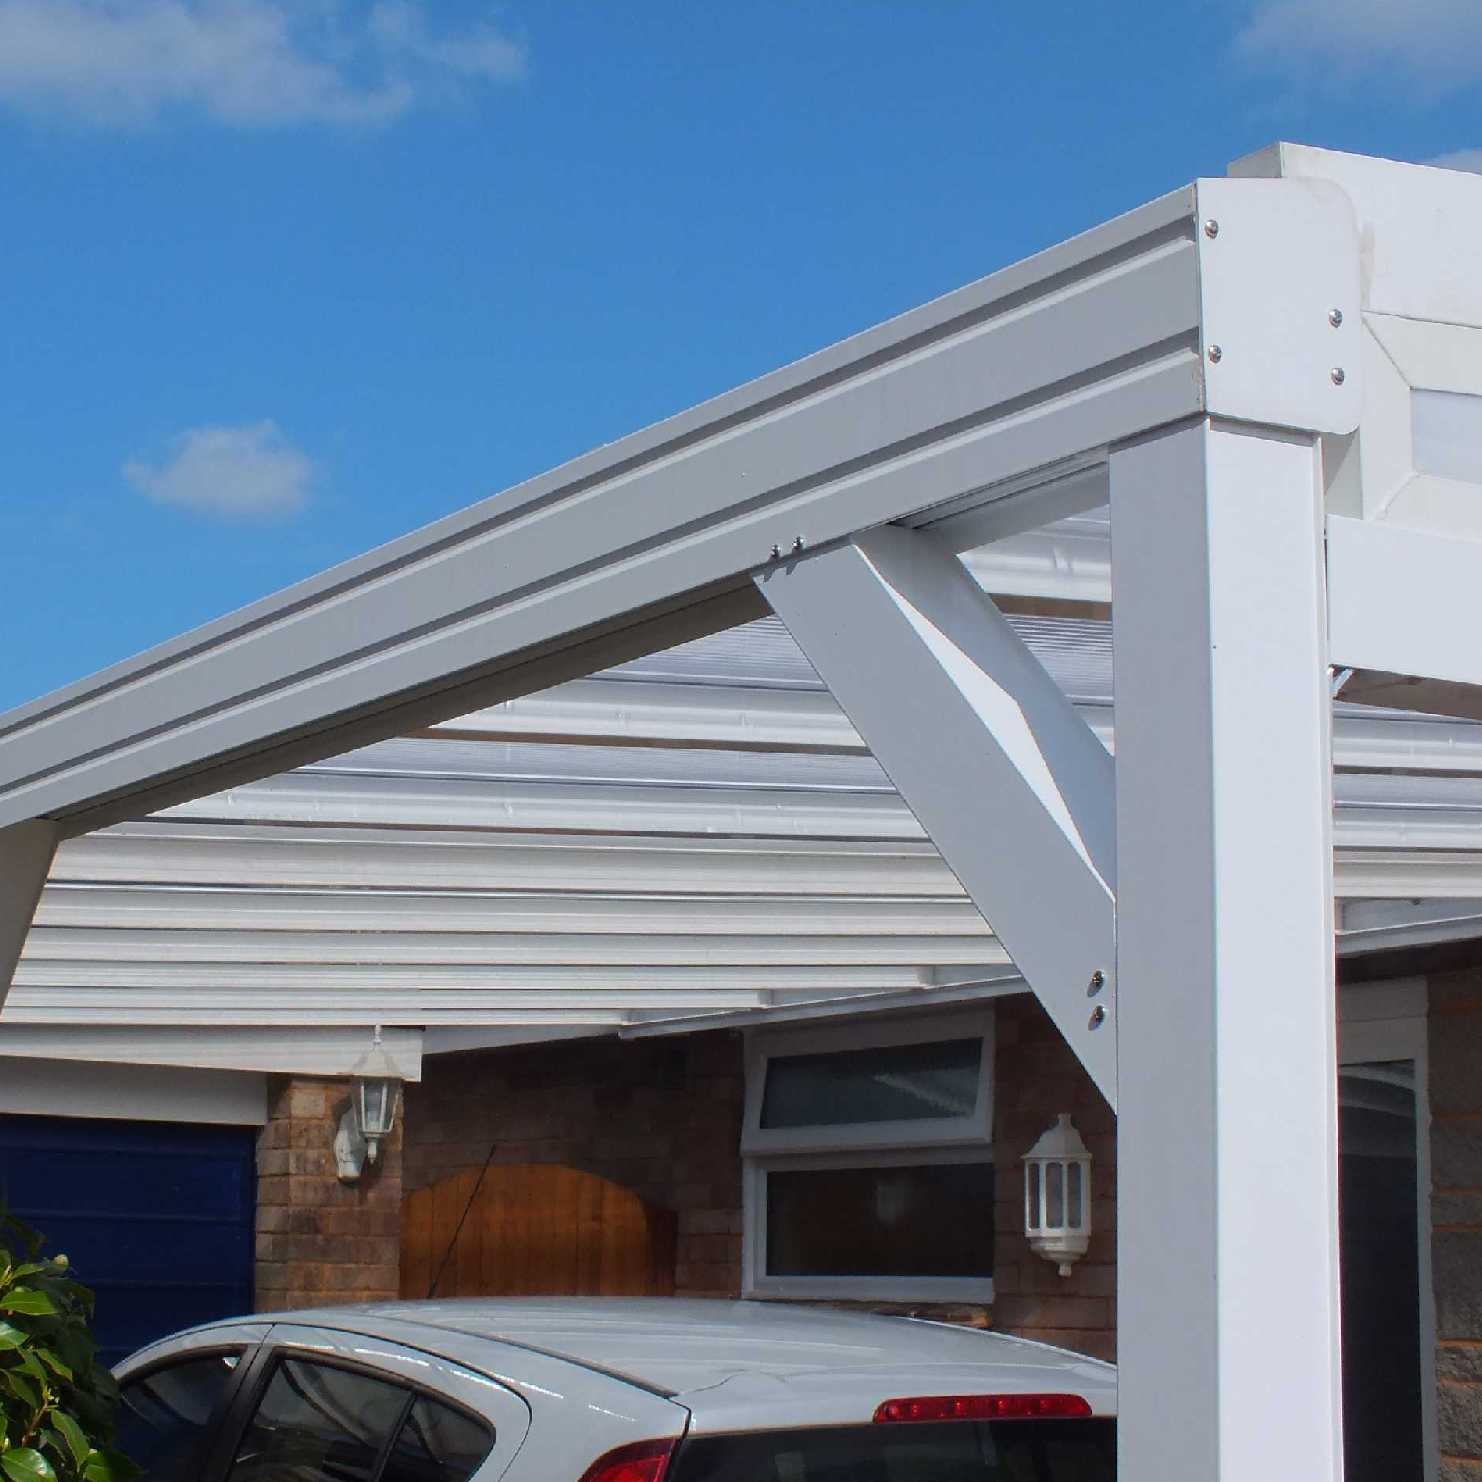 Great deals on Omega Smart Lean-To Canopy, White with 16mm Polycarbonate Glazing - 4.2m (W) x 1.5m (P), (3) Supporting Posts